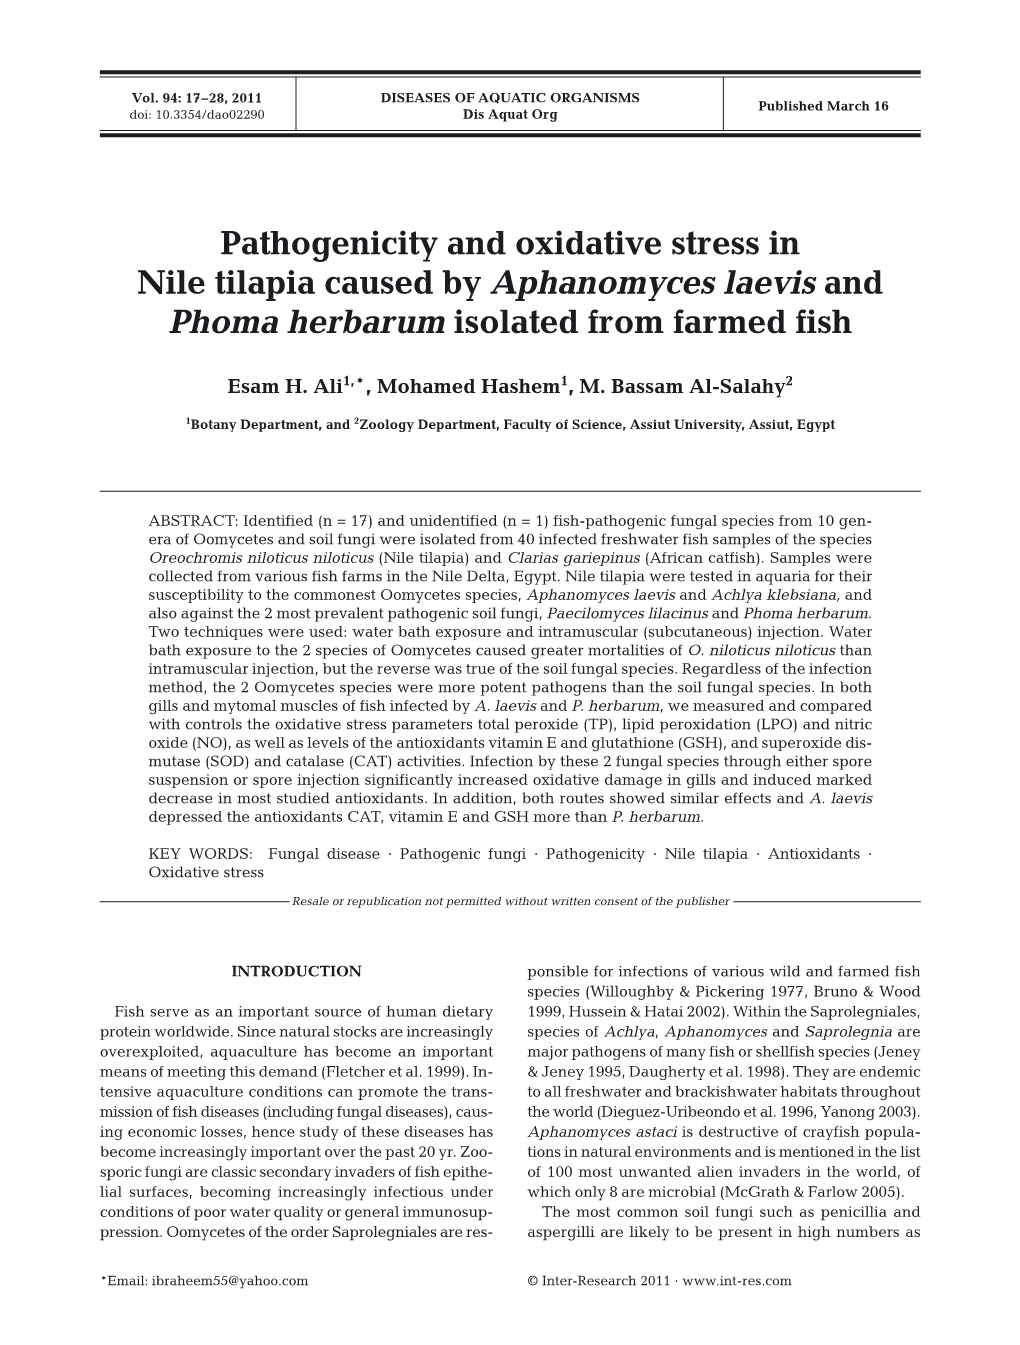 Pathogenicity and Oxidative Stress in Nile Tilapia Caused by Aphanomyces Laevis and Phoma Herbarum Isolated from Farmed Fish